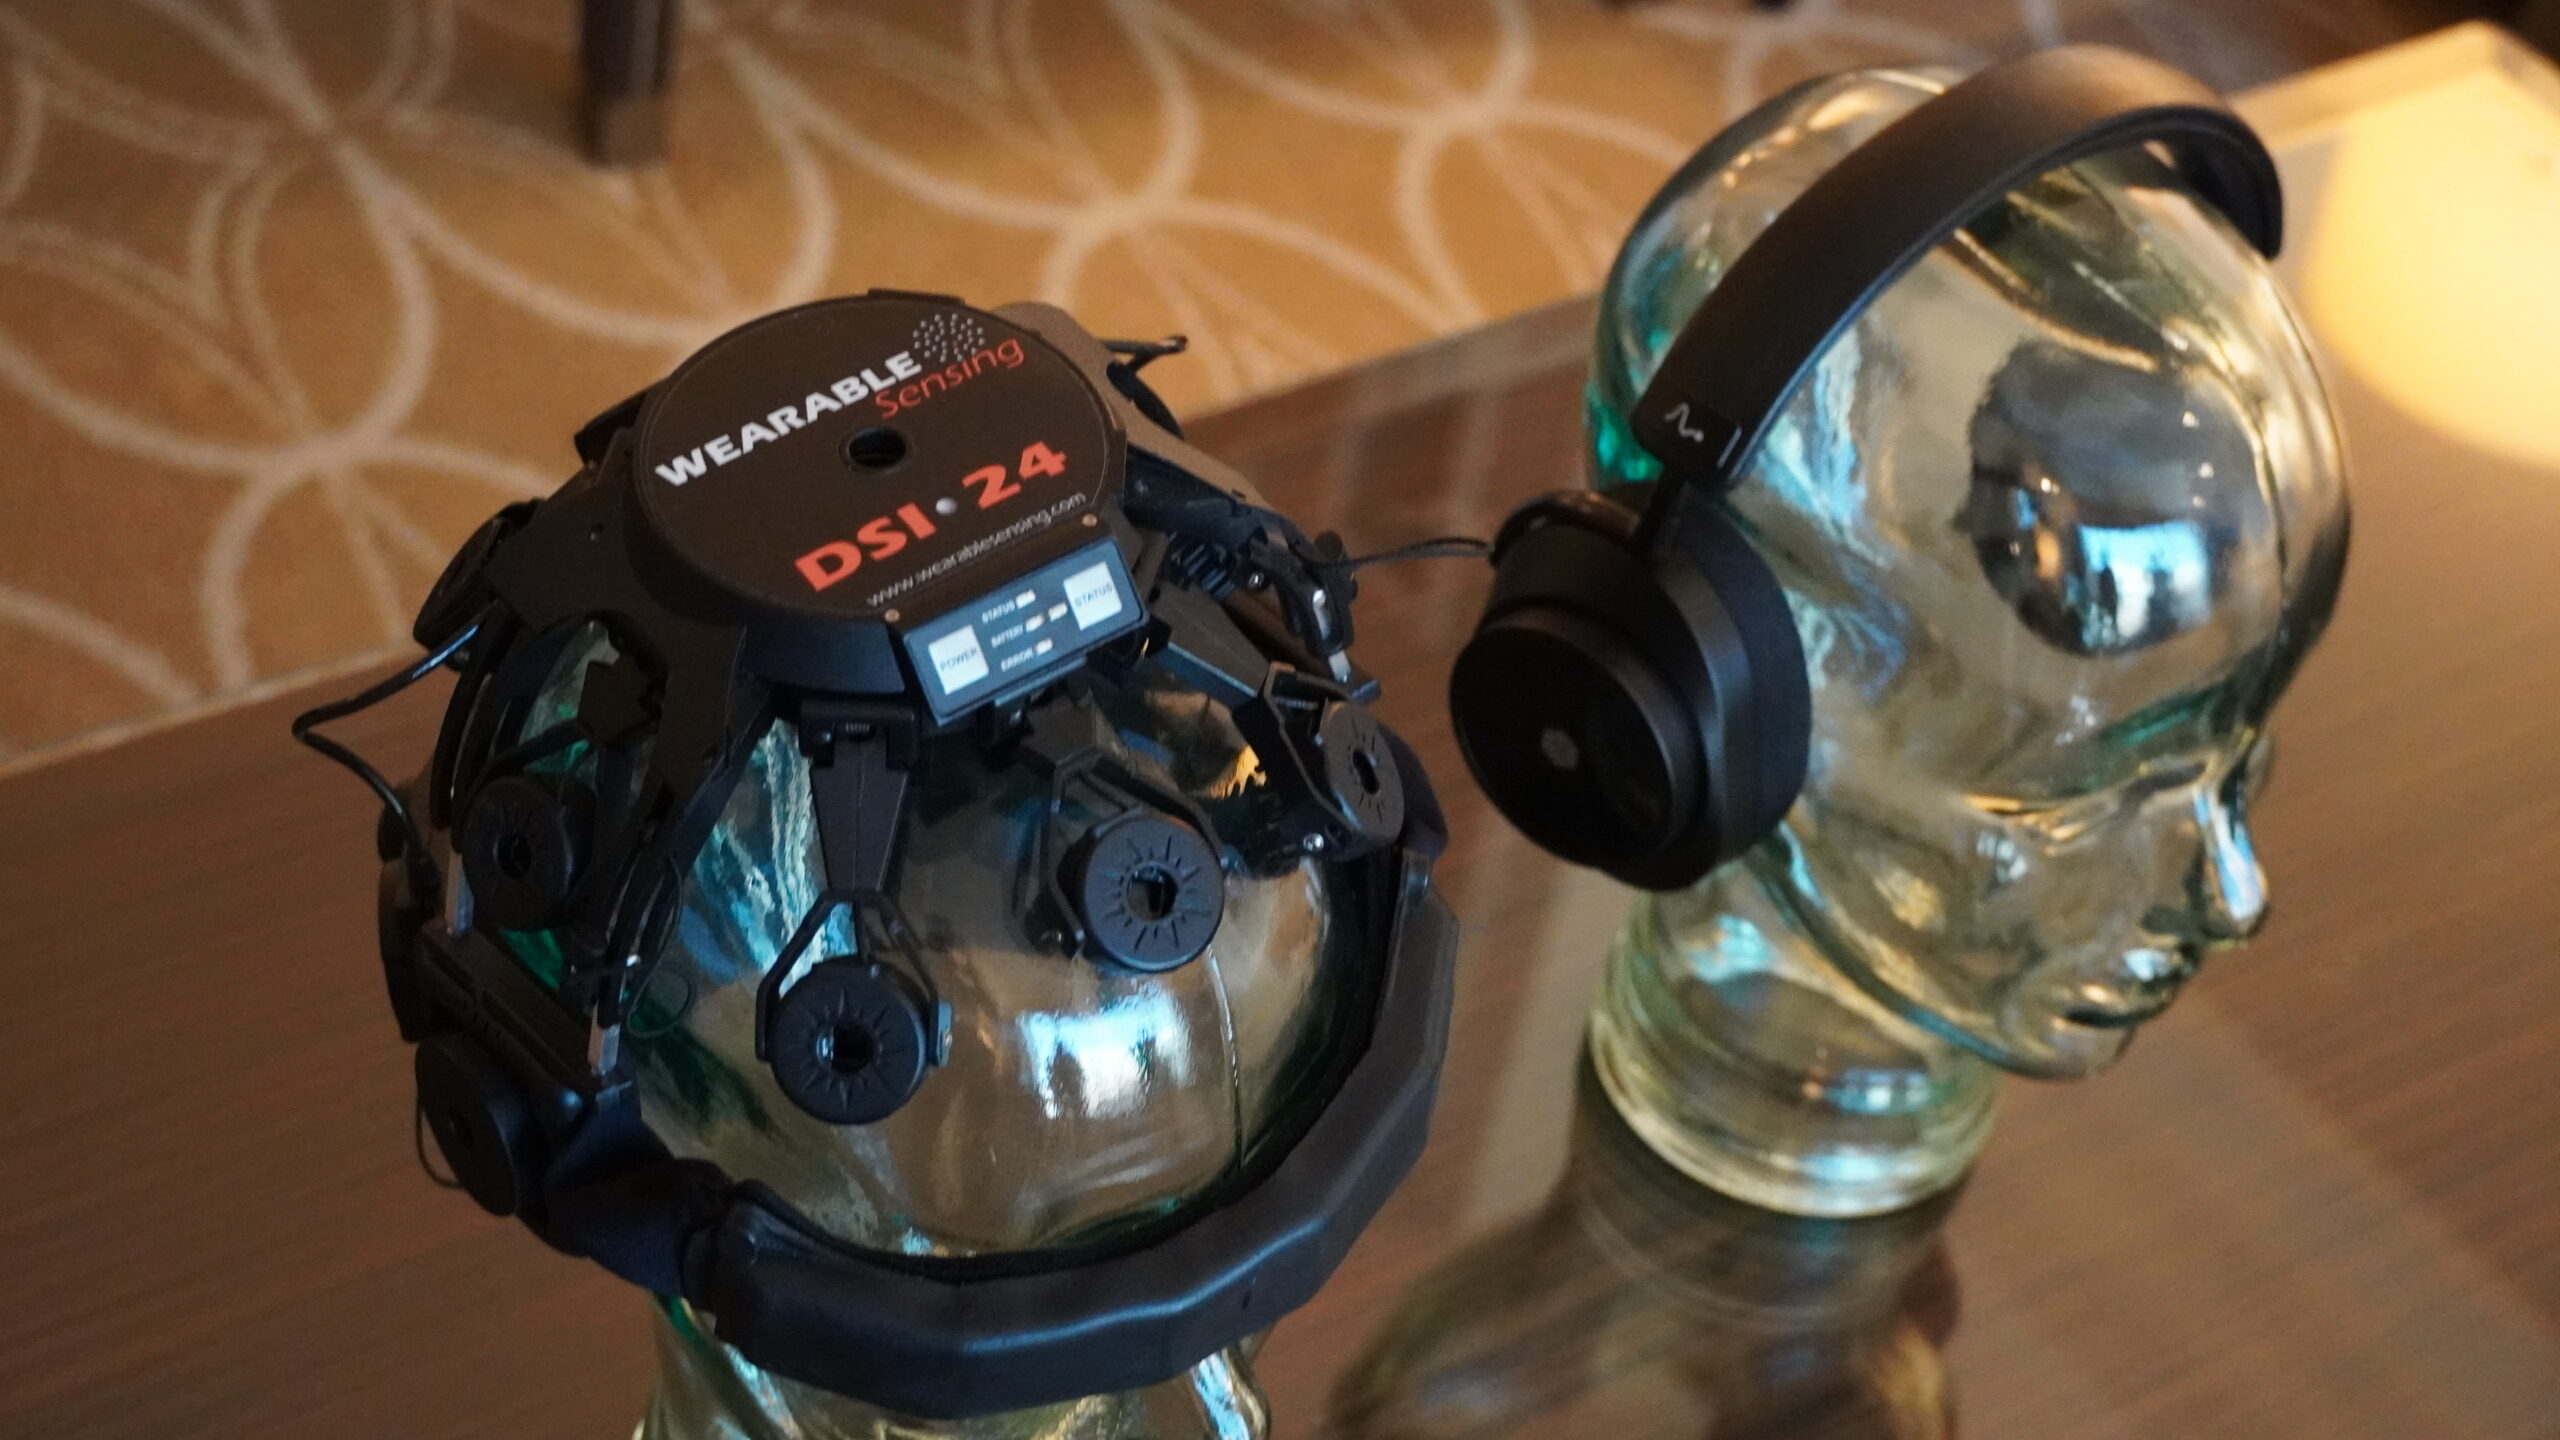 The DSI-24 Wearable Sensing headset compared to the MW75 Neuro headphones.